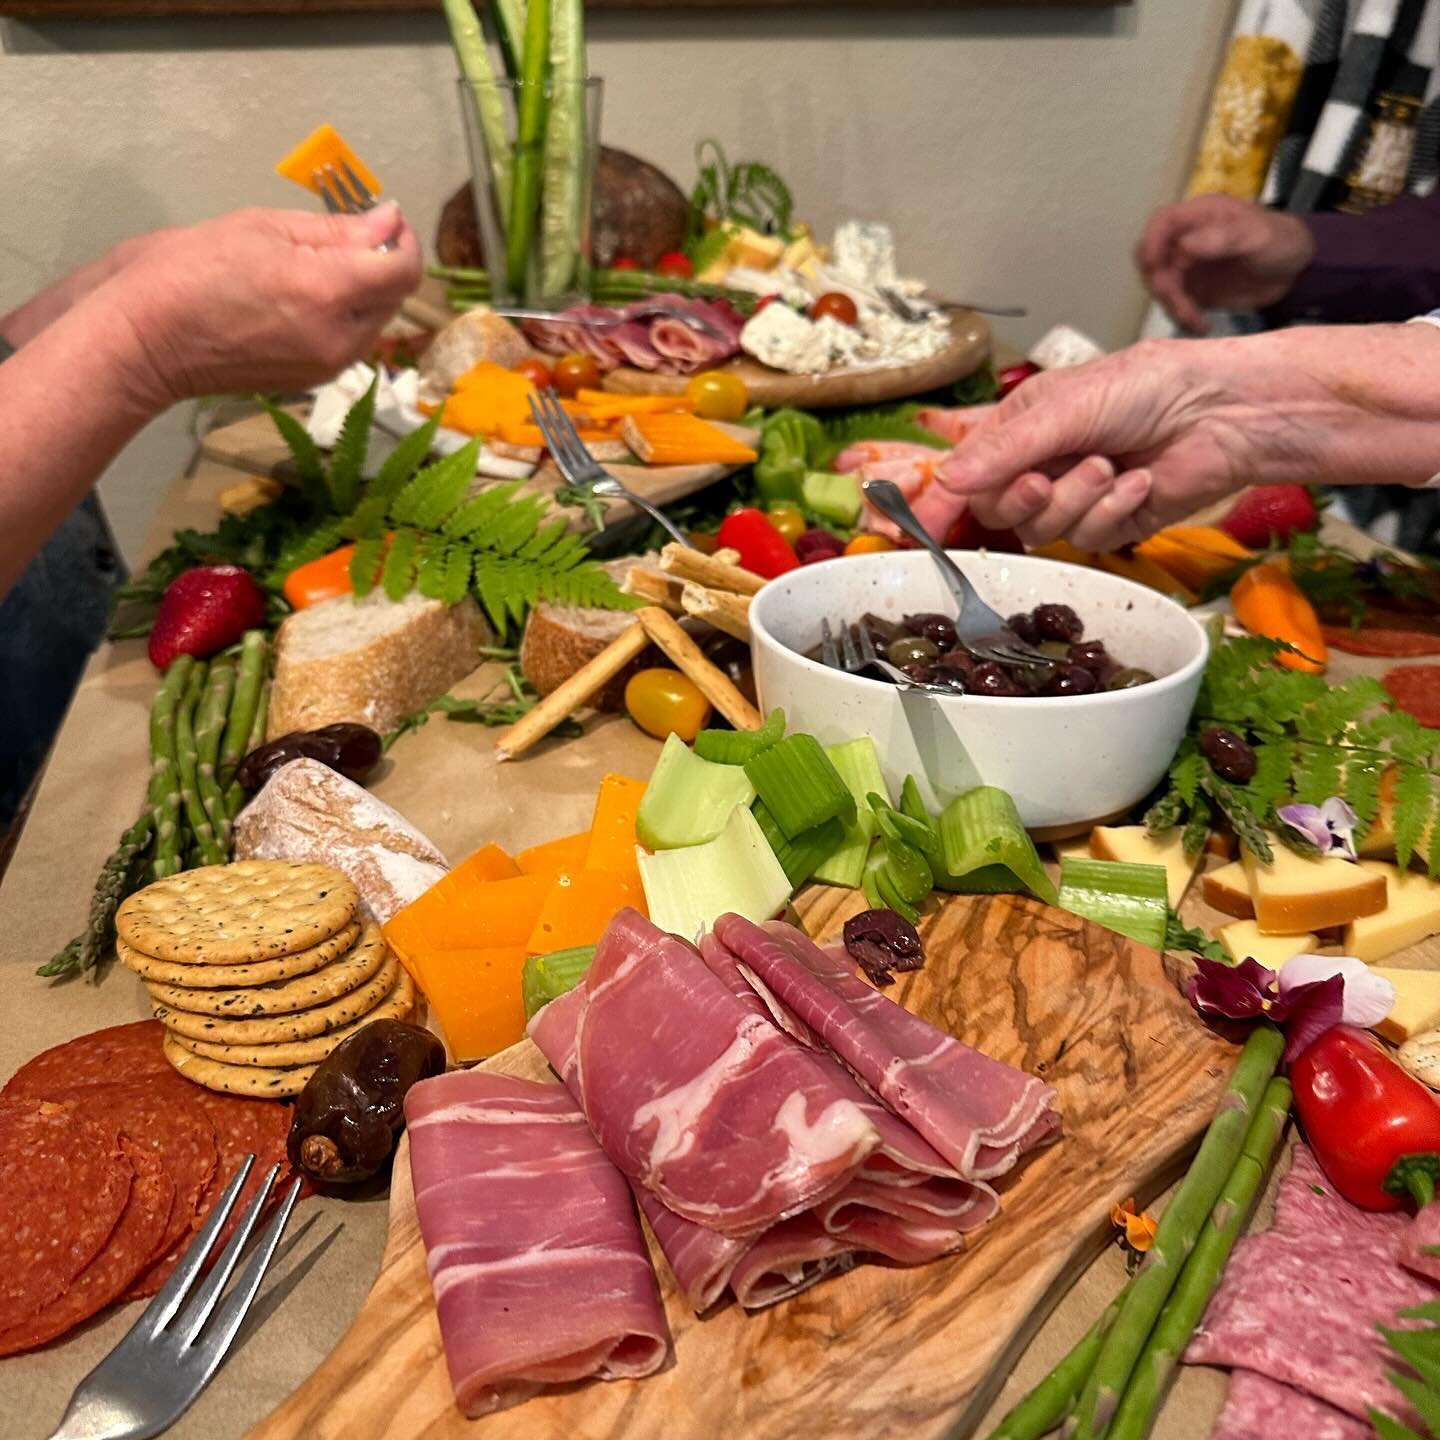 🧀🥖🥒 A few weeks ago we had the pleasure of hosting the Lake Lure Newcomers club for a lovely special event that included these huge grazing tables - table-sized charcuterie boards that had something for everyone. We&rsquo;re happy to talk about an